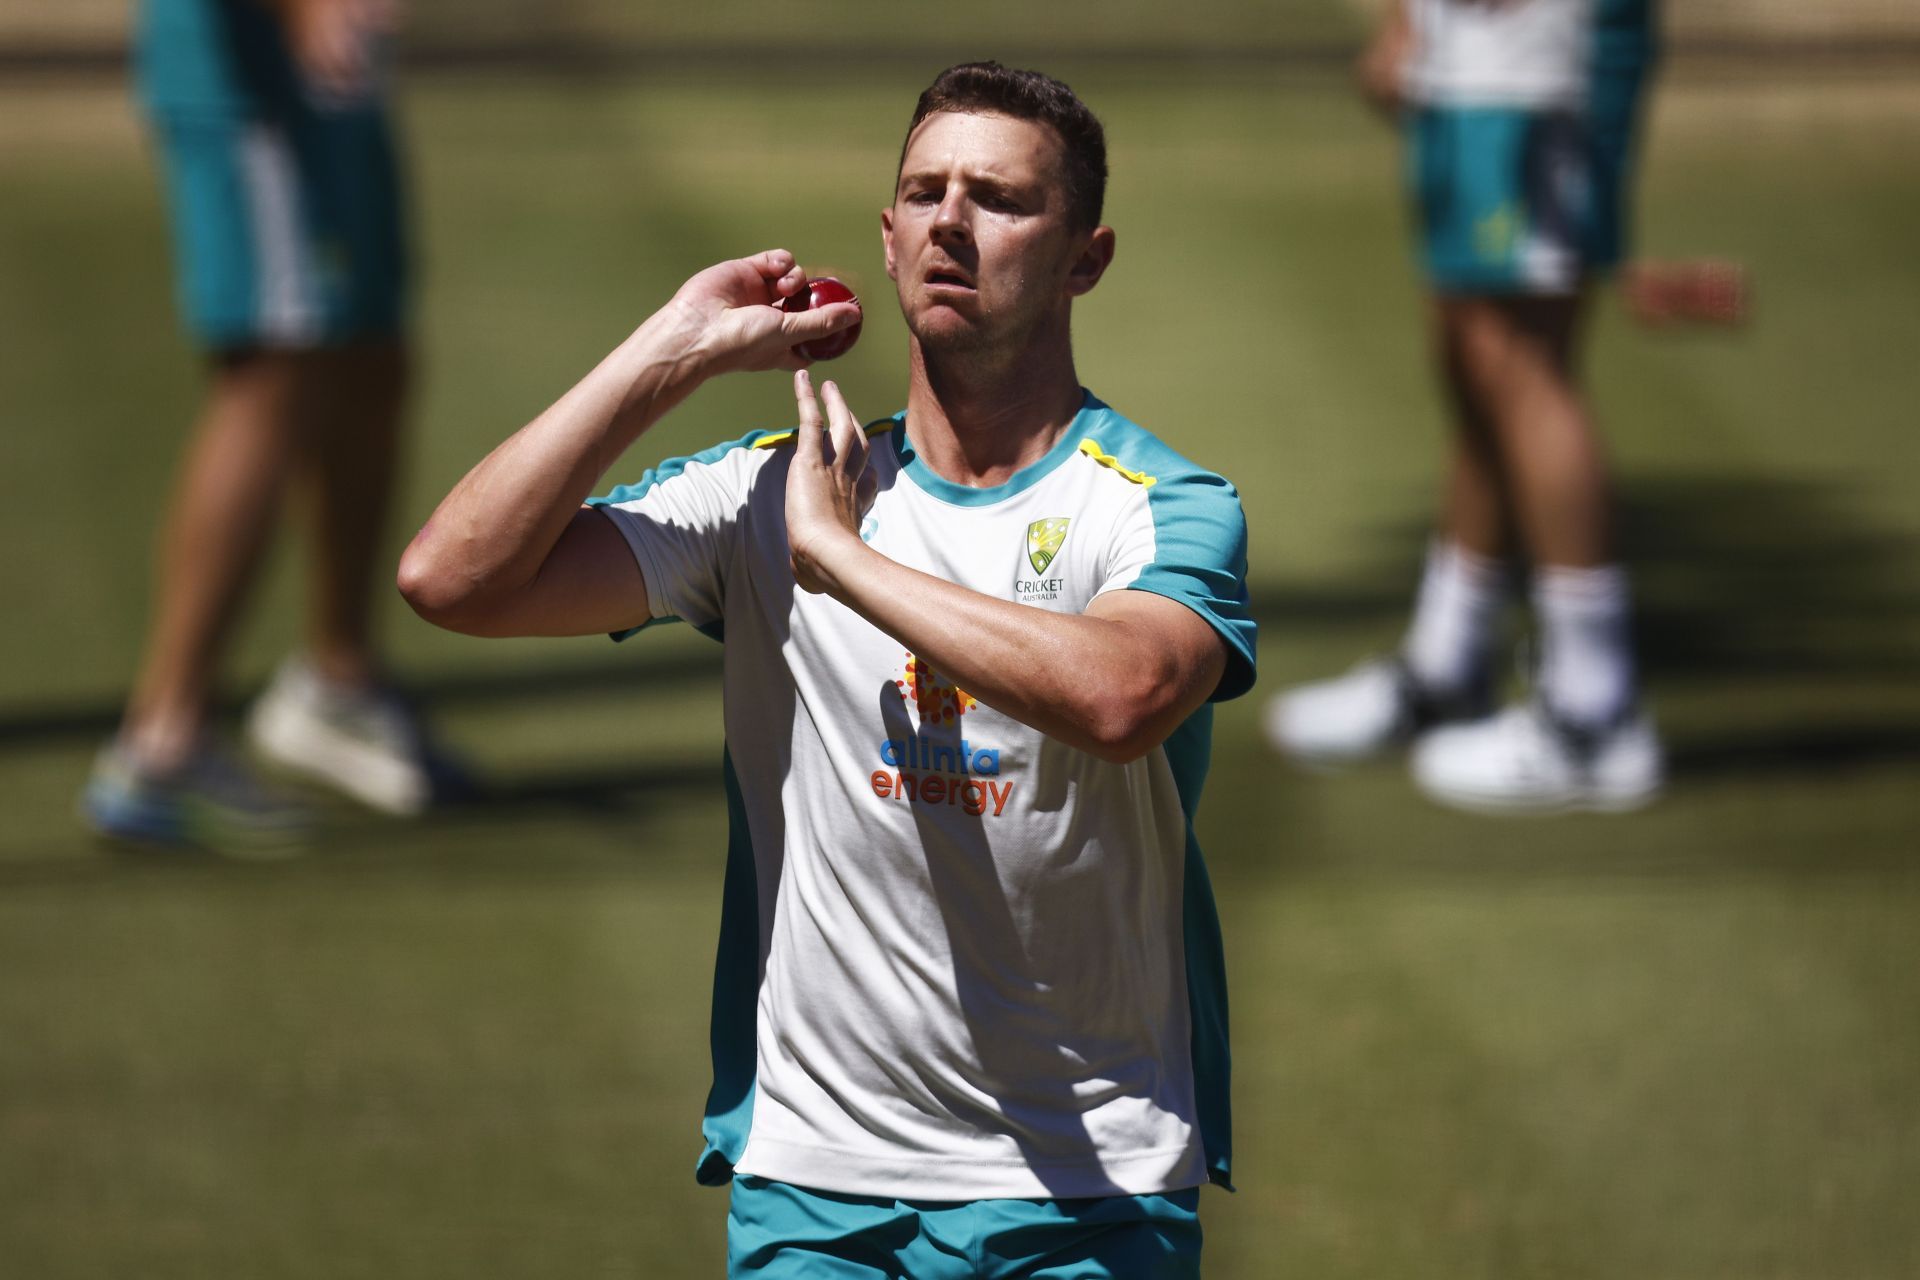 Josh Hazlewood has missed the last two Tests due to an injury